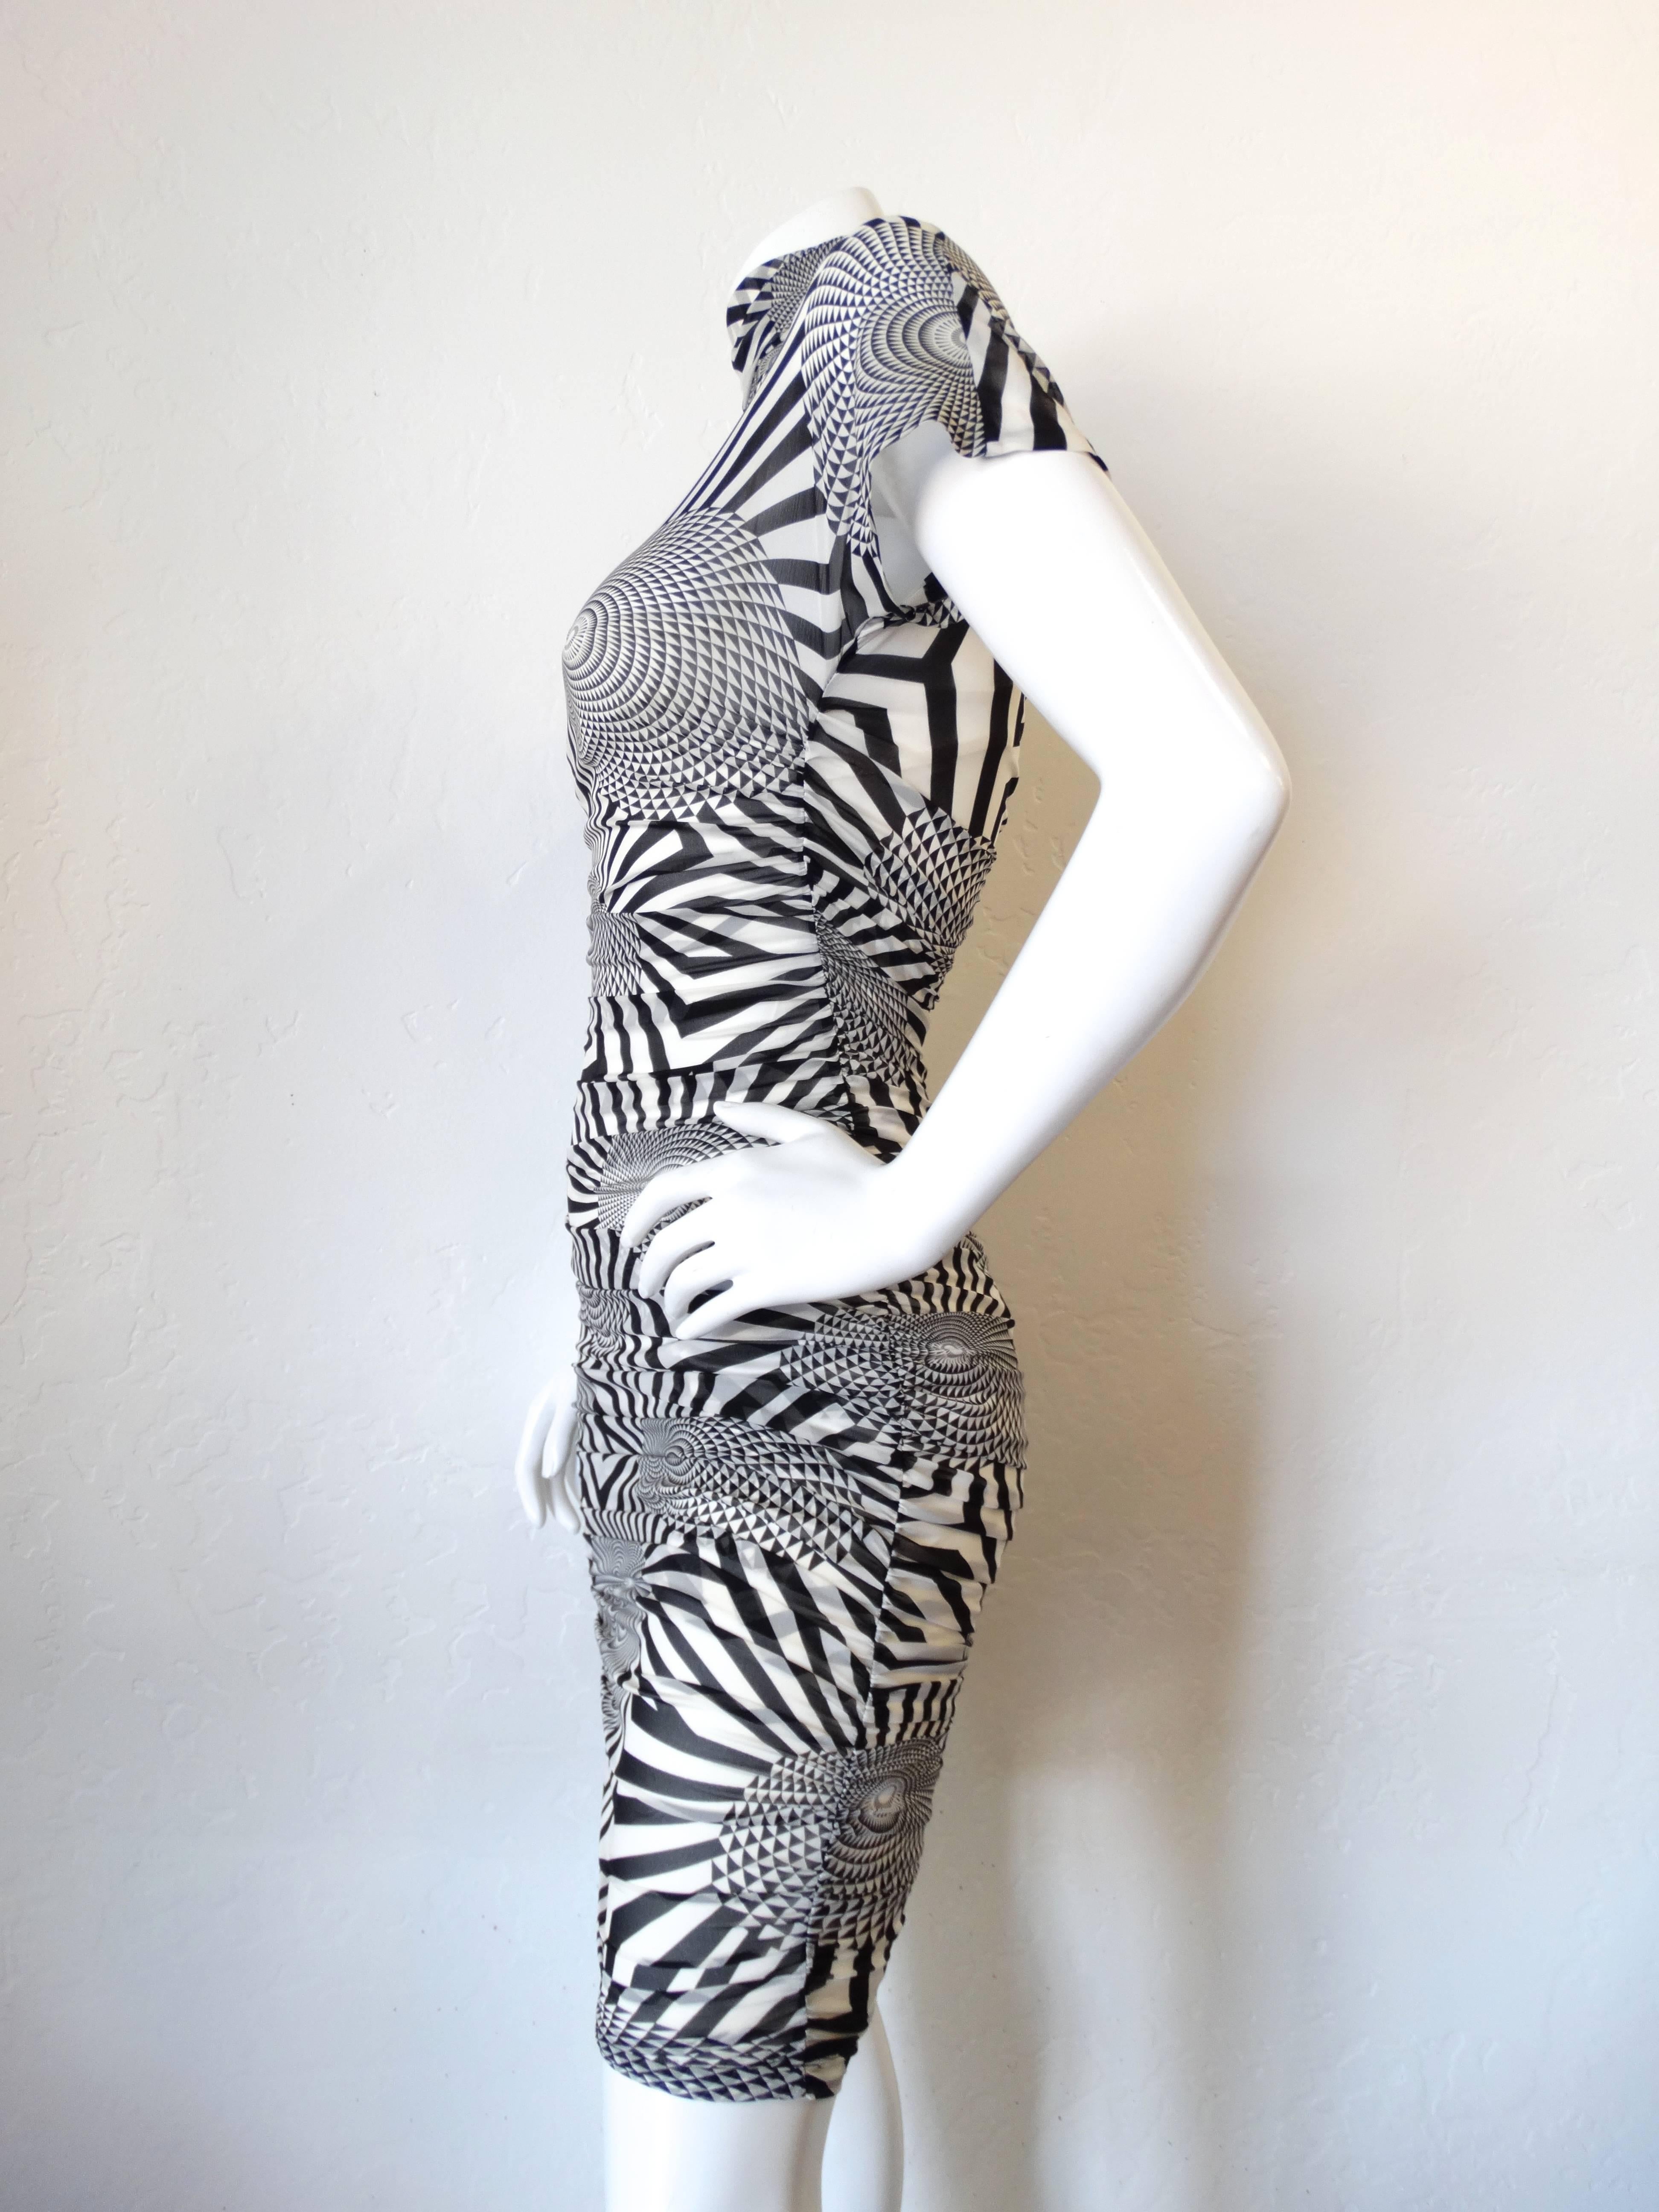 Dolce & Gabbana bodycon dress from the early 2000s! Sheer stretch fabric with black and white optical illusion print. Mock turtleneck neckline and short sleeve fit. Zips up the back.  Marked a size 40; best fits an XS/S though there is some stretch.